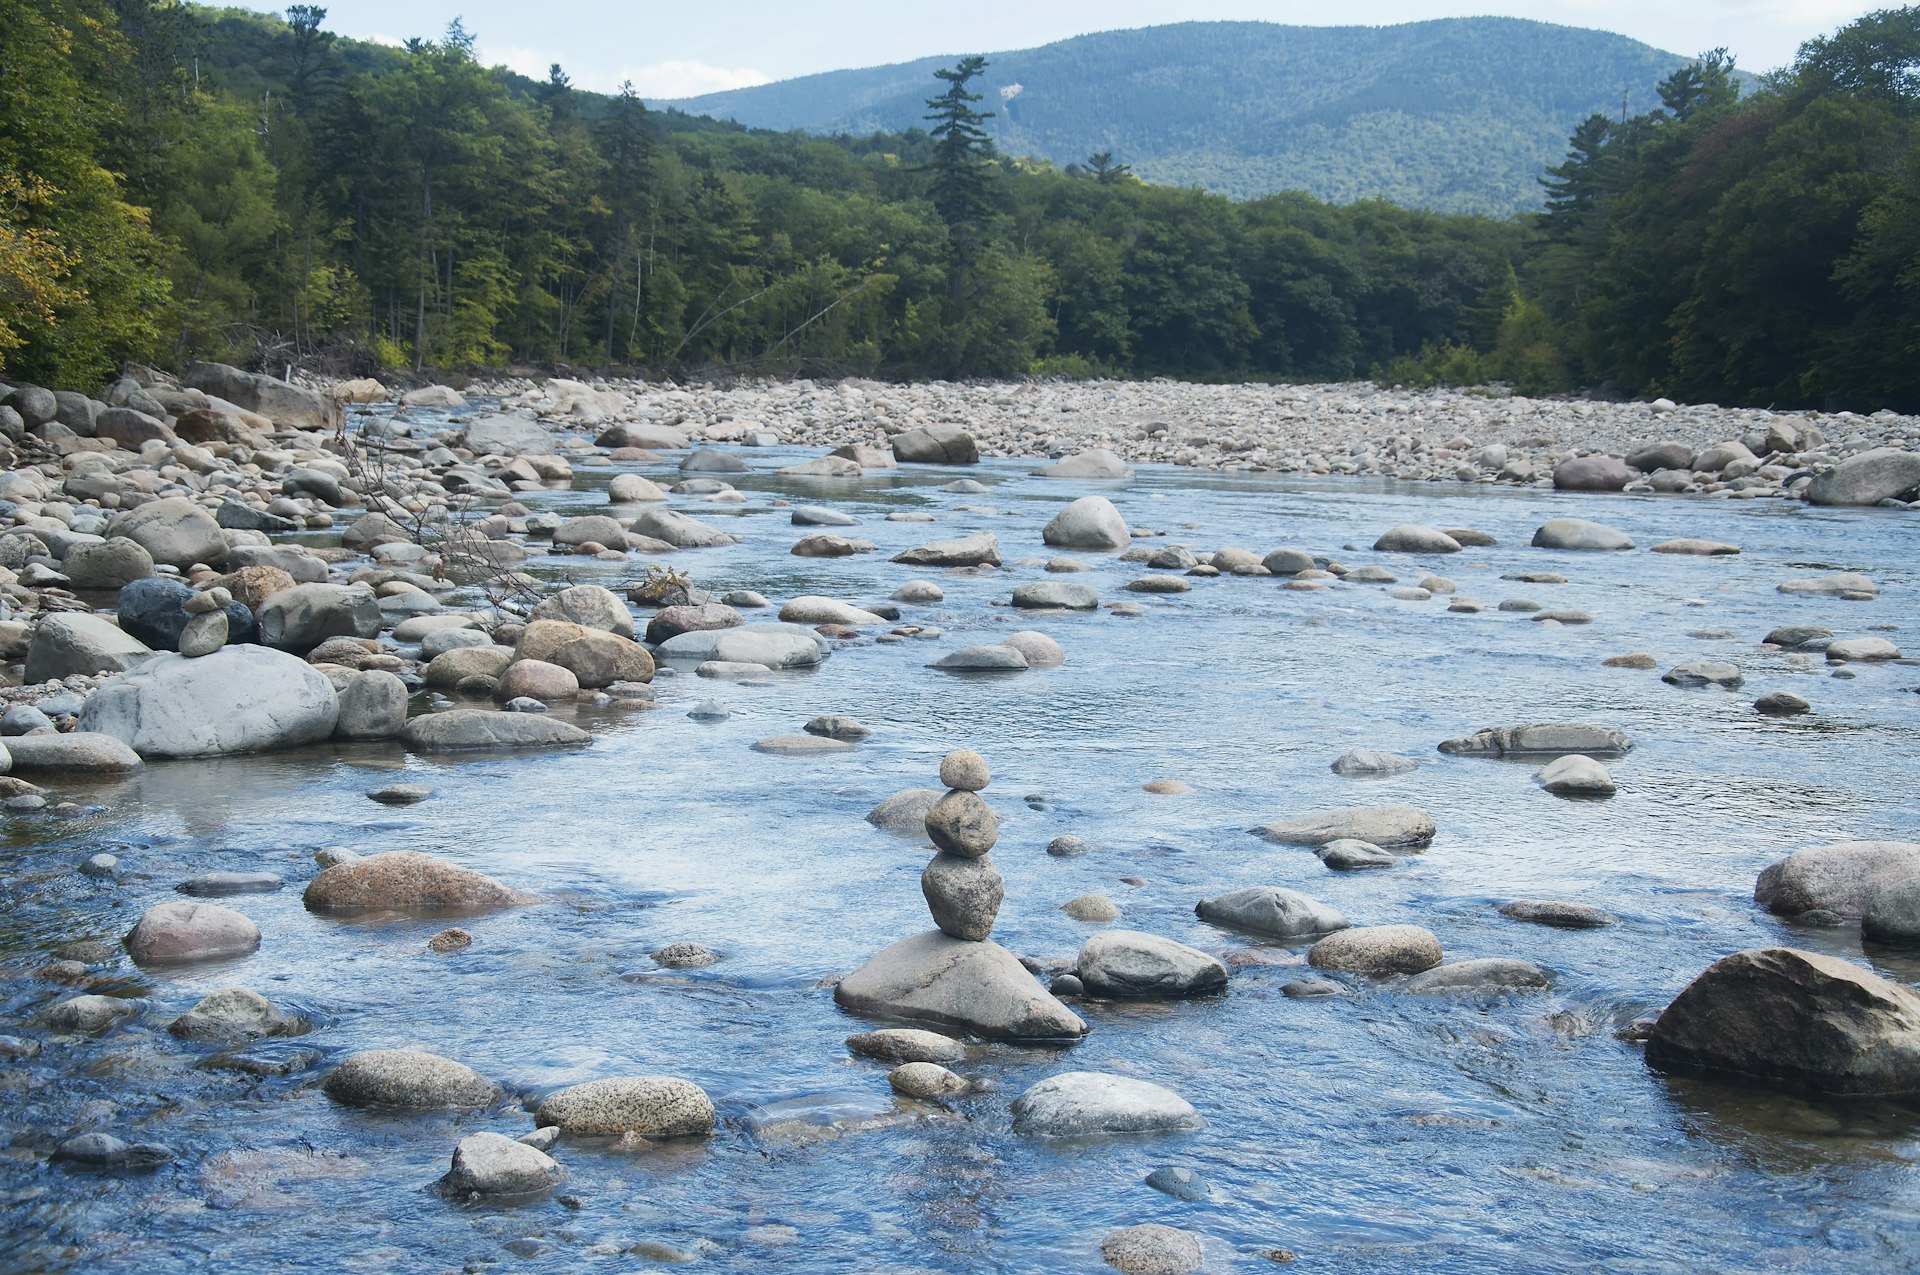 A rock cairn in the middle of a river